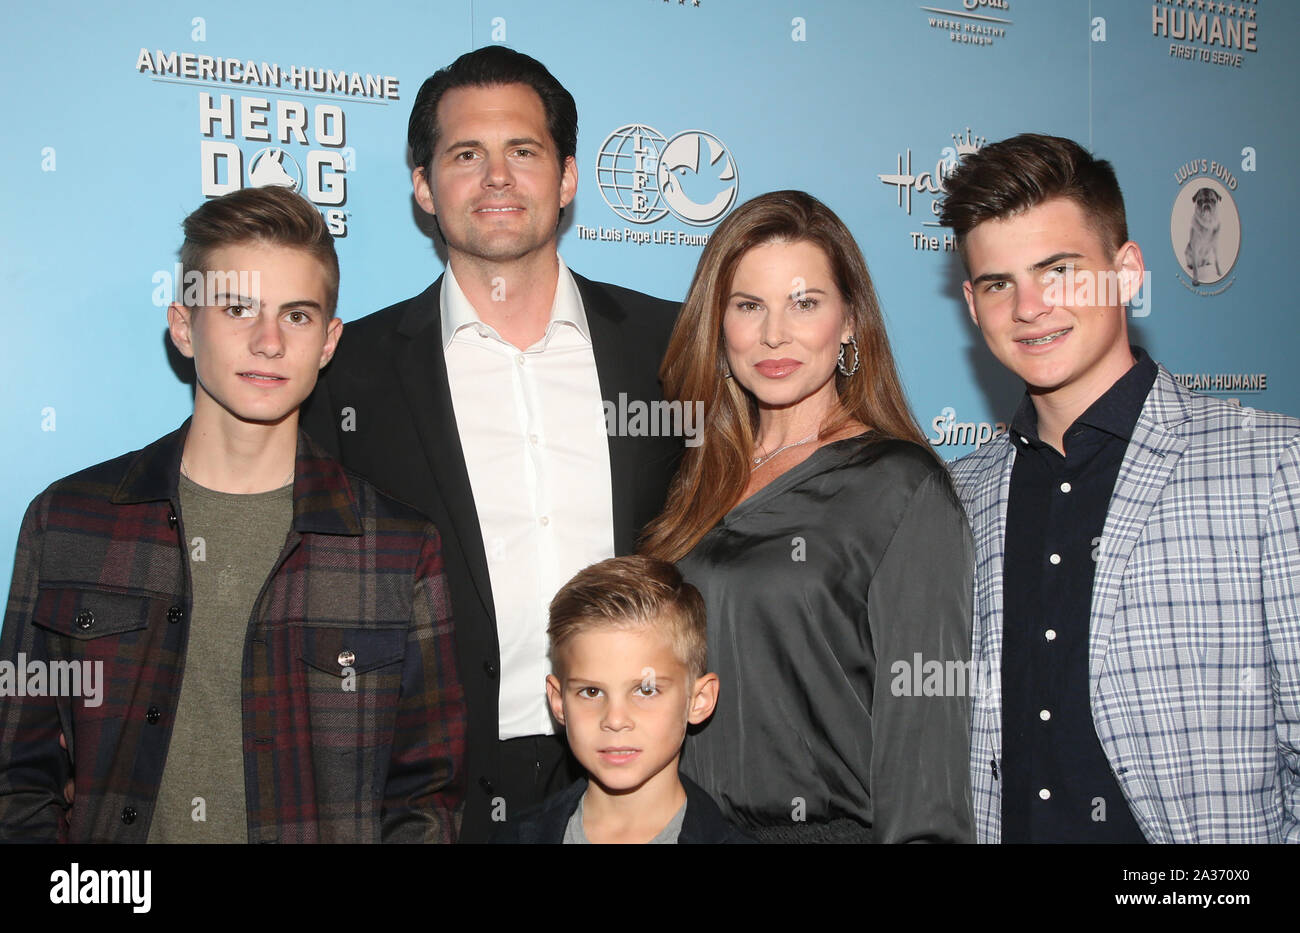 Beverly Hills, Ca. 5th Oct, 2019. Kristoffer Polaha, Julianne Morris, Micah Polaha, Kristoffer Caleb Polaha, Jude Polaha, 9th Annual American Humane Hero Dog Awards at The Beverly Hilton Hotel in Beverly Hills, California on October 5, 2019. Credit: Faye Sadou/Media Punch/Alamy Live News Stock Photo